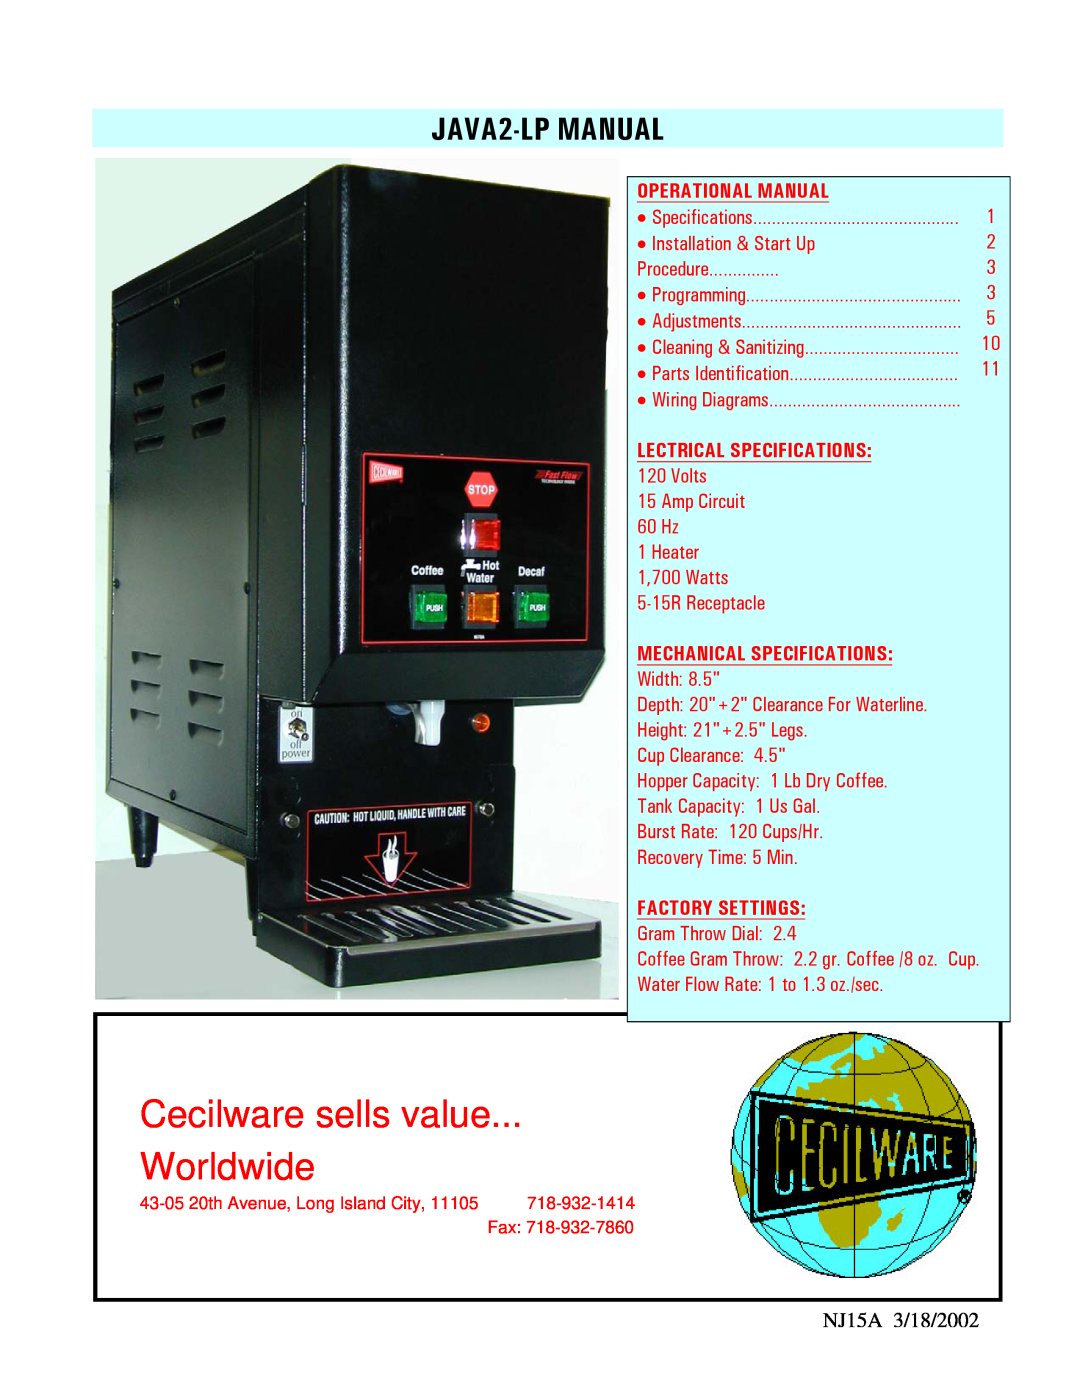 Cecilware specifications Cecilware sells value Worldwide, JAVA2-LP MANUAL, Operational Manual, Lectrical Specifications 